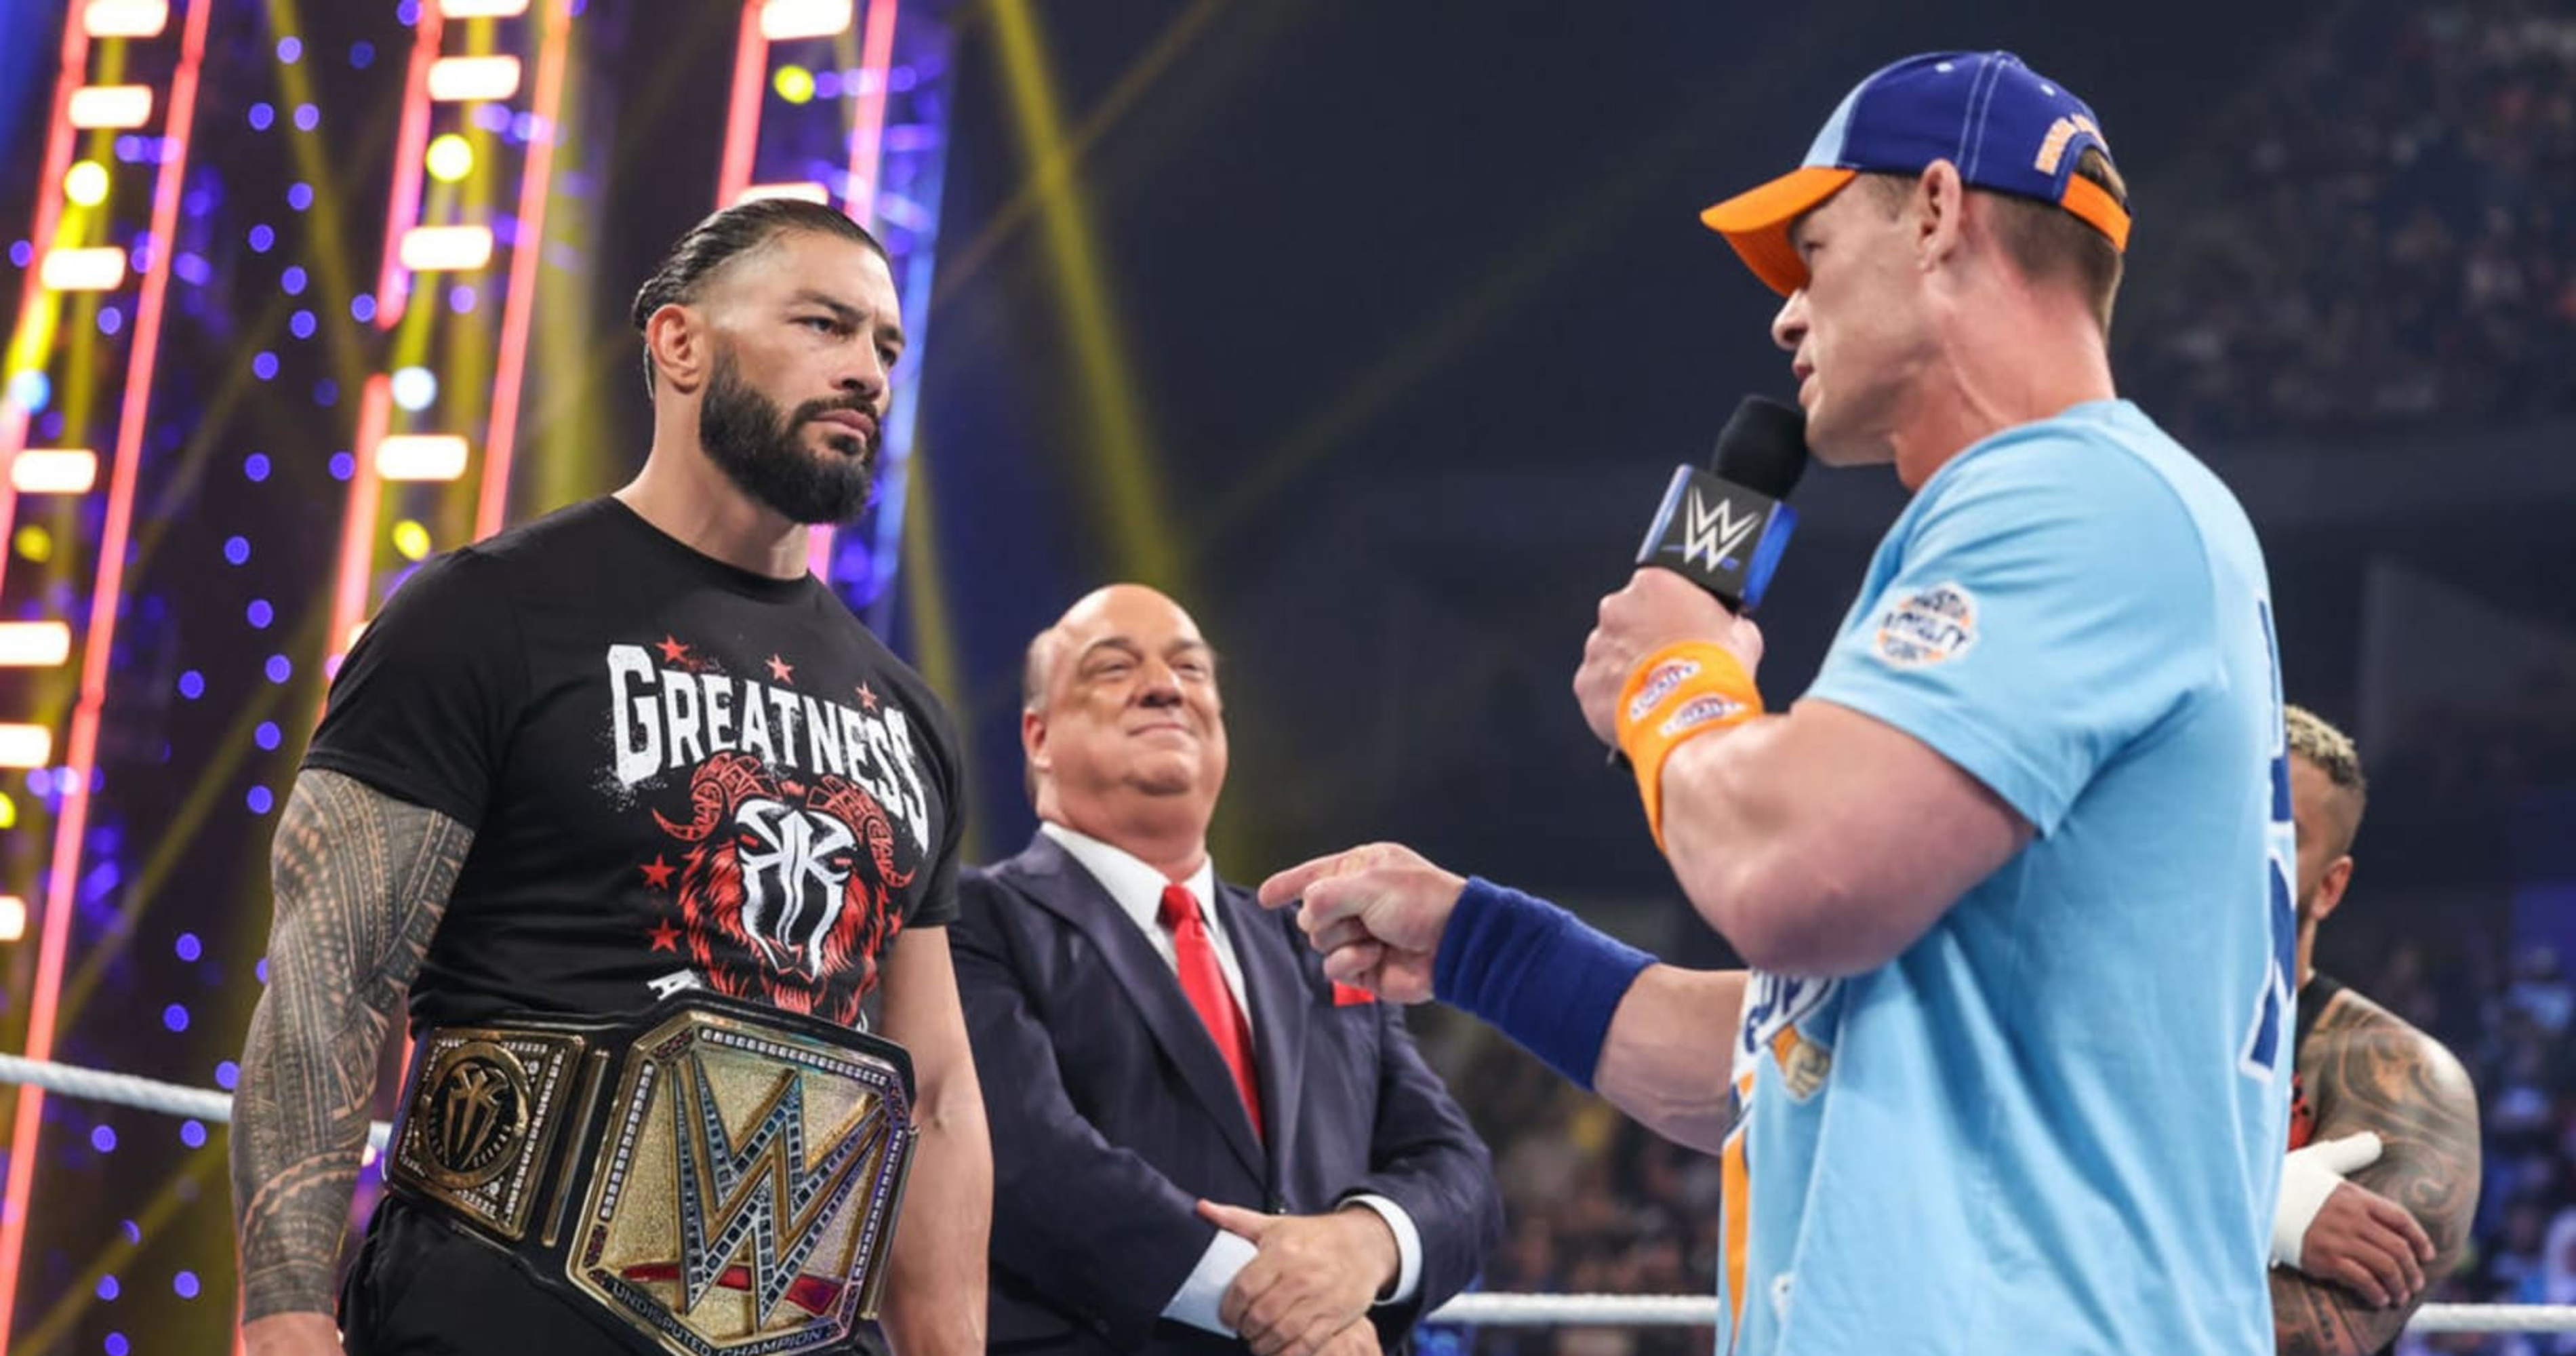 Booking Cena and Stone Cold into Rock, Reigns and Rhodes Story at WWE WrestleMania 40